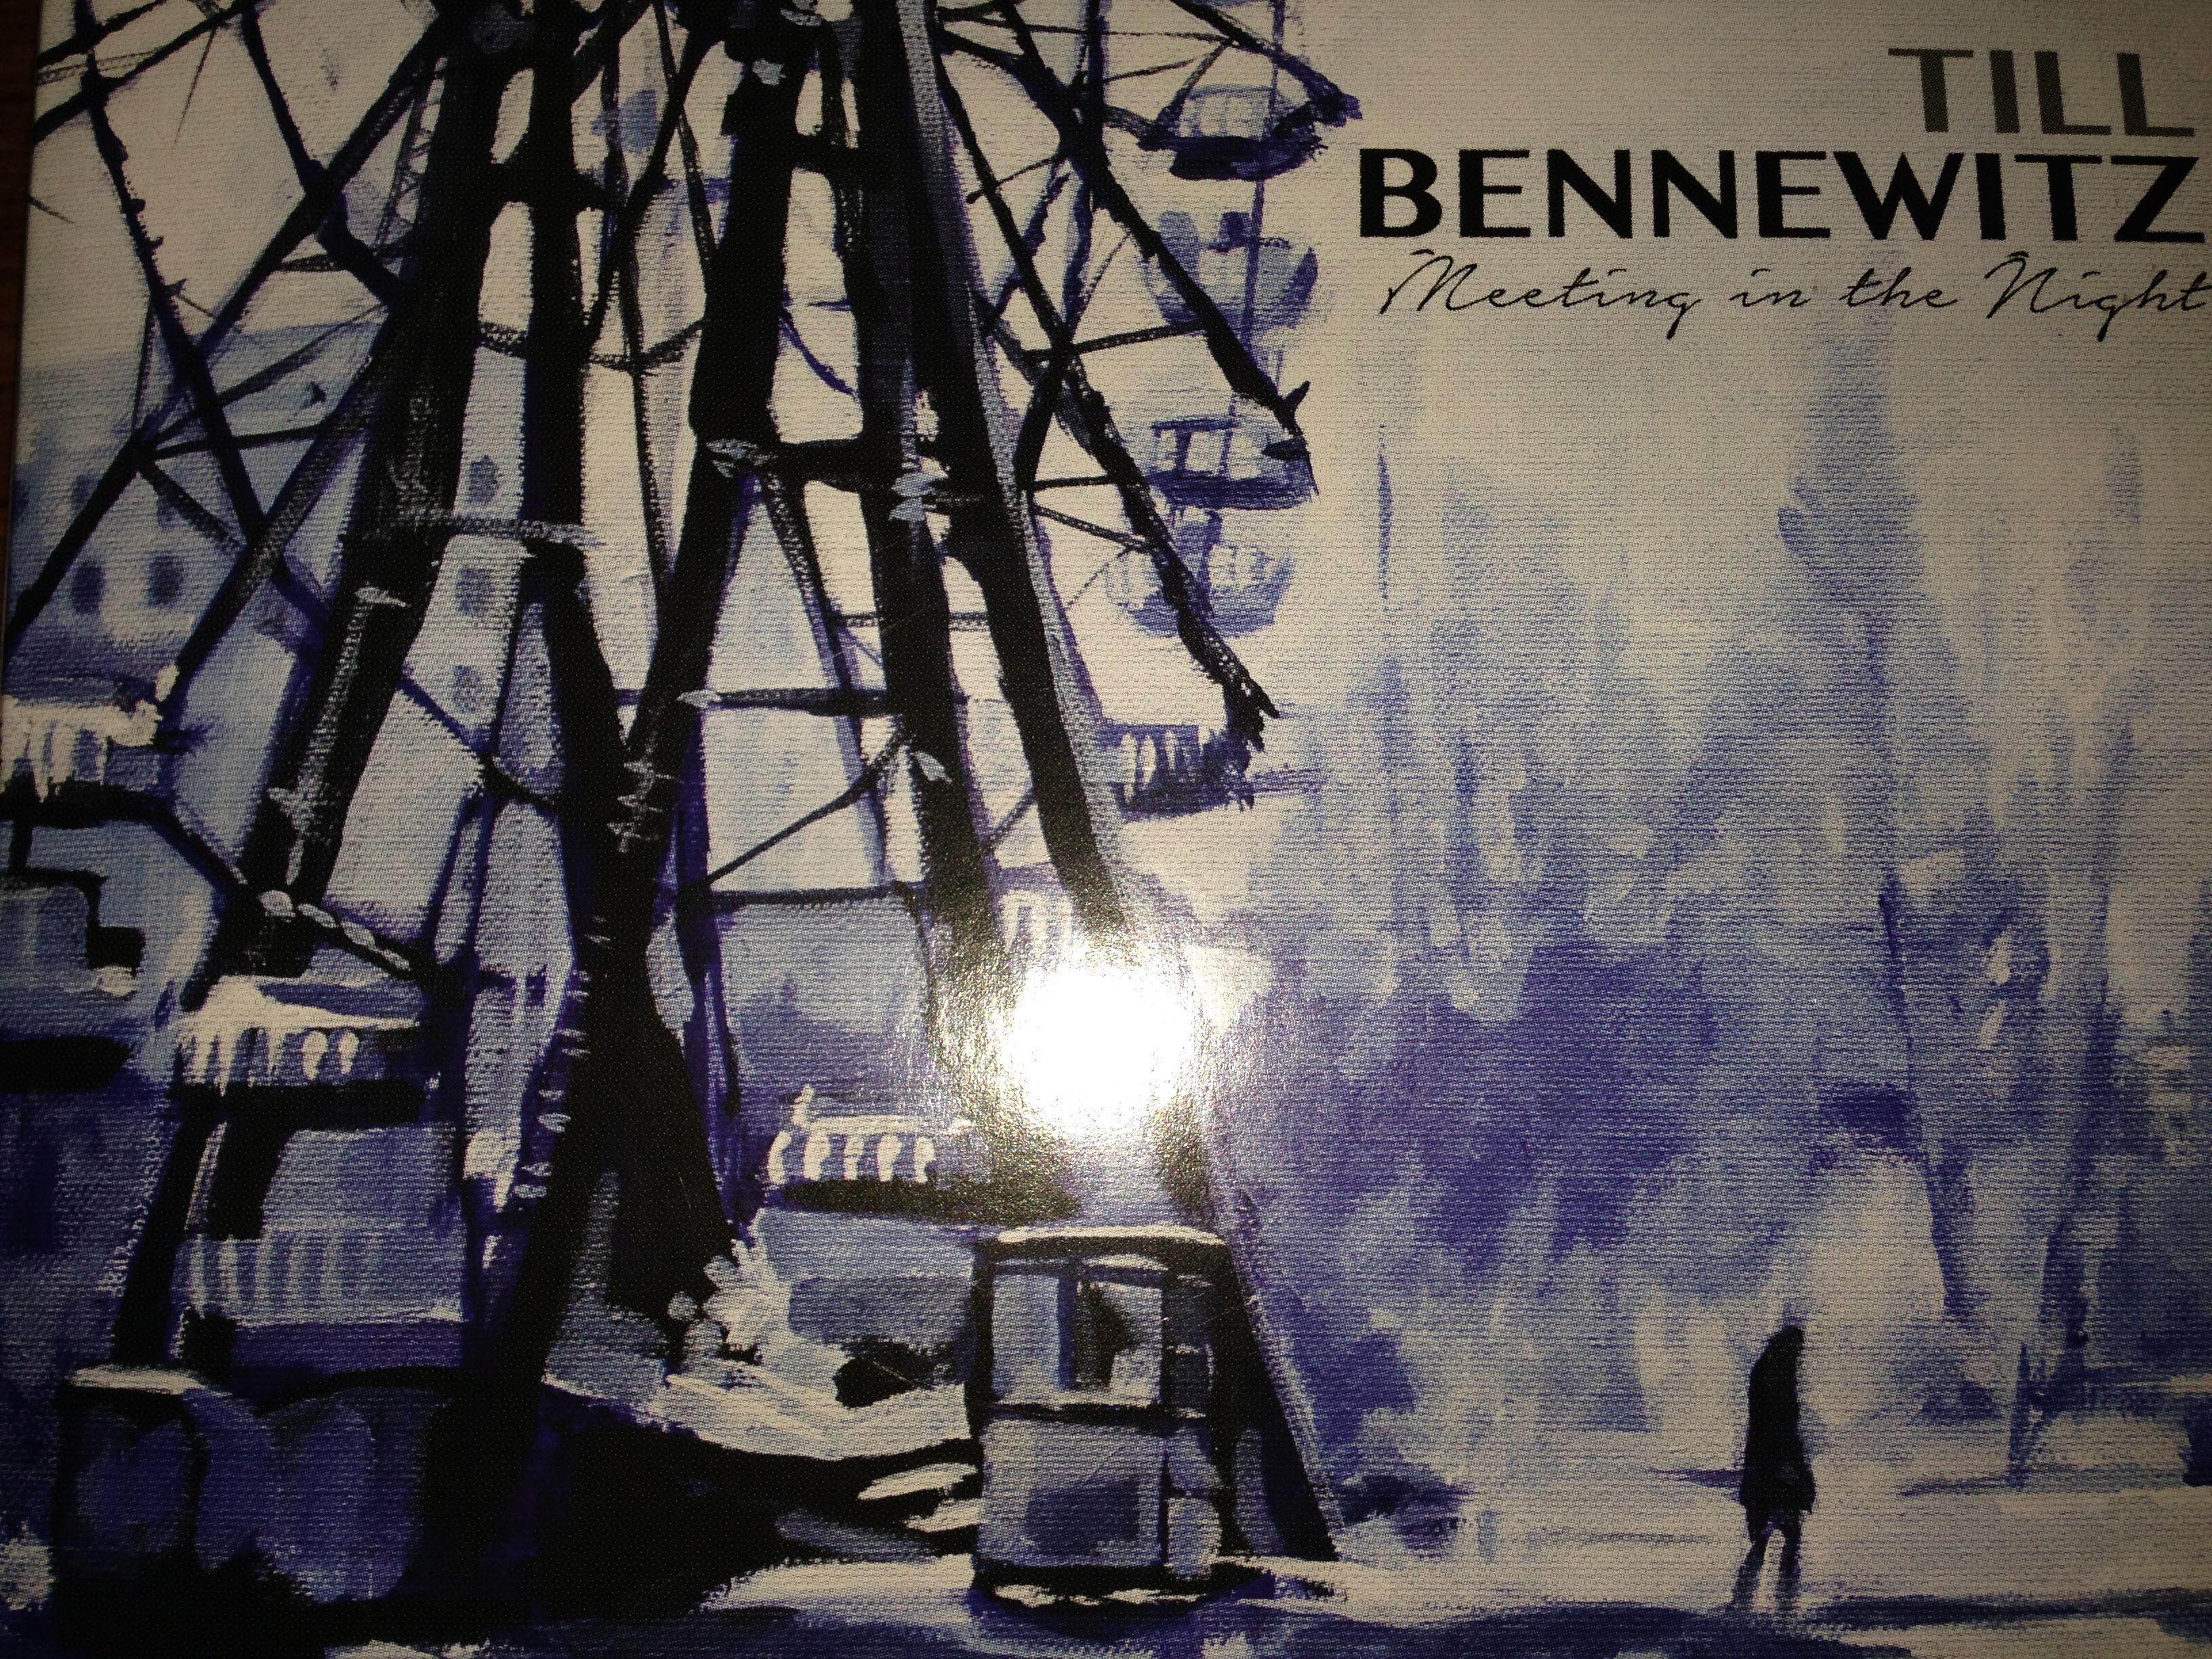 Till Bennewitz album 'Meeting In The Night'. Mixed by Steve Wright and Wayne Proctor at Y Dream Studios, Wales.